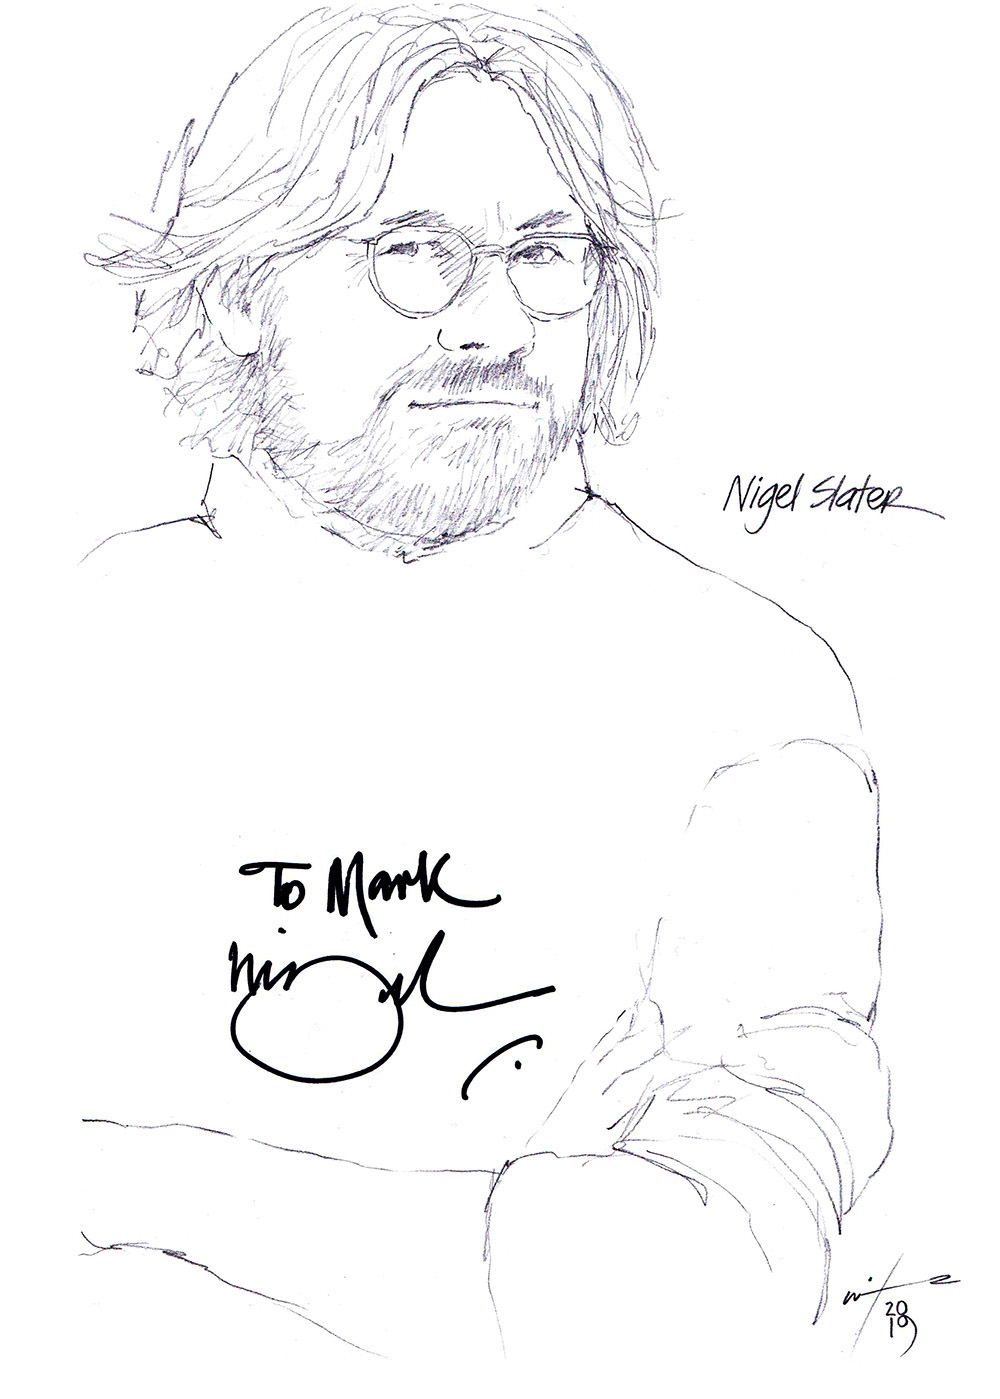 Autographed drawing of Chef Nigel Slater